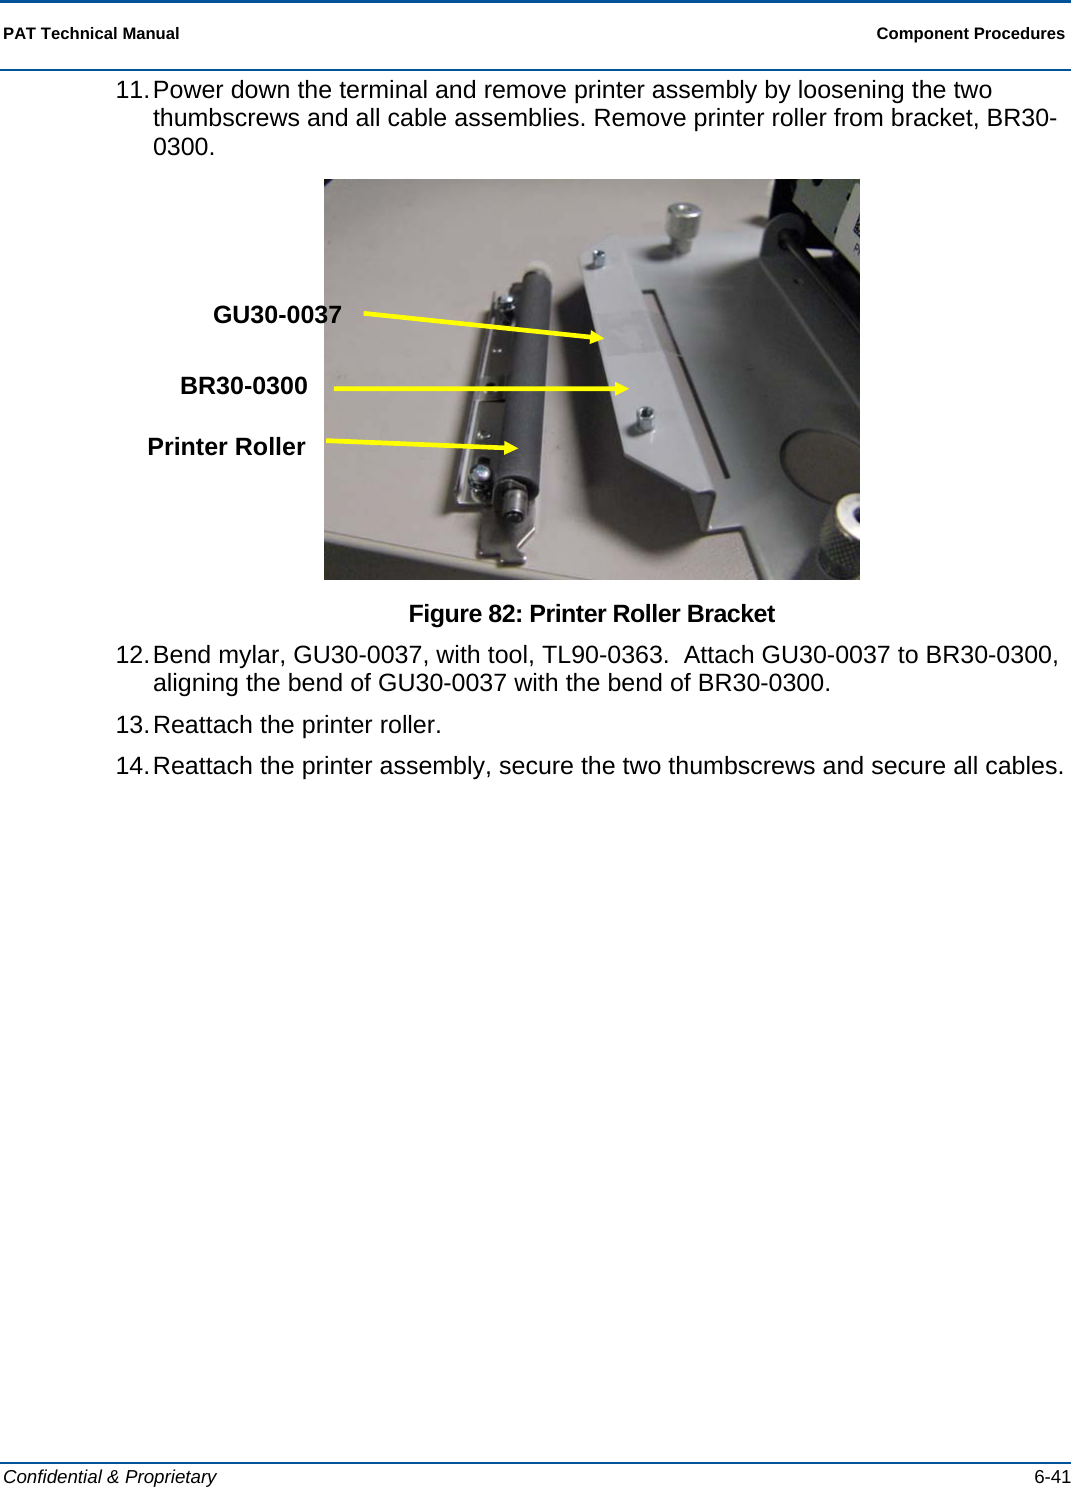  PAT Technical Manual  Component Procedures  Confidential &amp; Proprietary   6-41 11. Power down the terminal and remove printer assembly by loosening the two thumbscrews and all cable assemblies. Remove printer roller from bracket, BR30-0300.  Figure 82: Printer Roller Bracket 12. Bend mylar, GU30-0037, with tool, TL90-0363.  Attach GU30-0037 to BR30-0300, aligning the bend of GU30-0037 with the bend of BR30-0300. 13. Reattach the printer roller. 14. Reattach the printer assembly, secure the two thumbscrews and secure all cables.  GU30-0037 BR30-0300 Printer Roller 